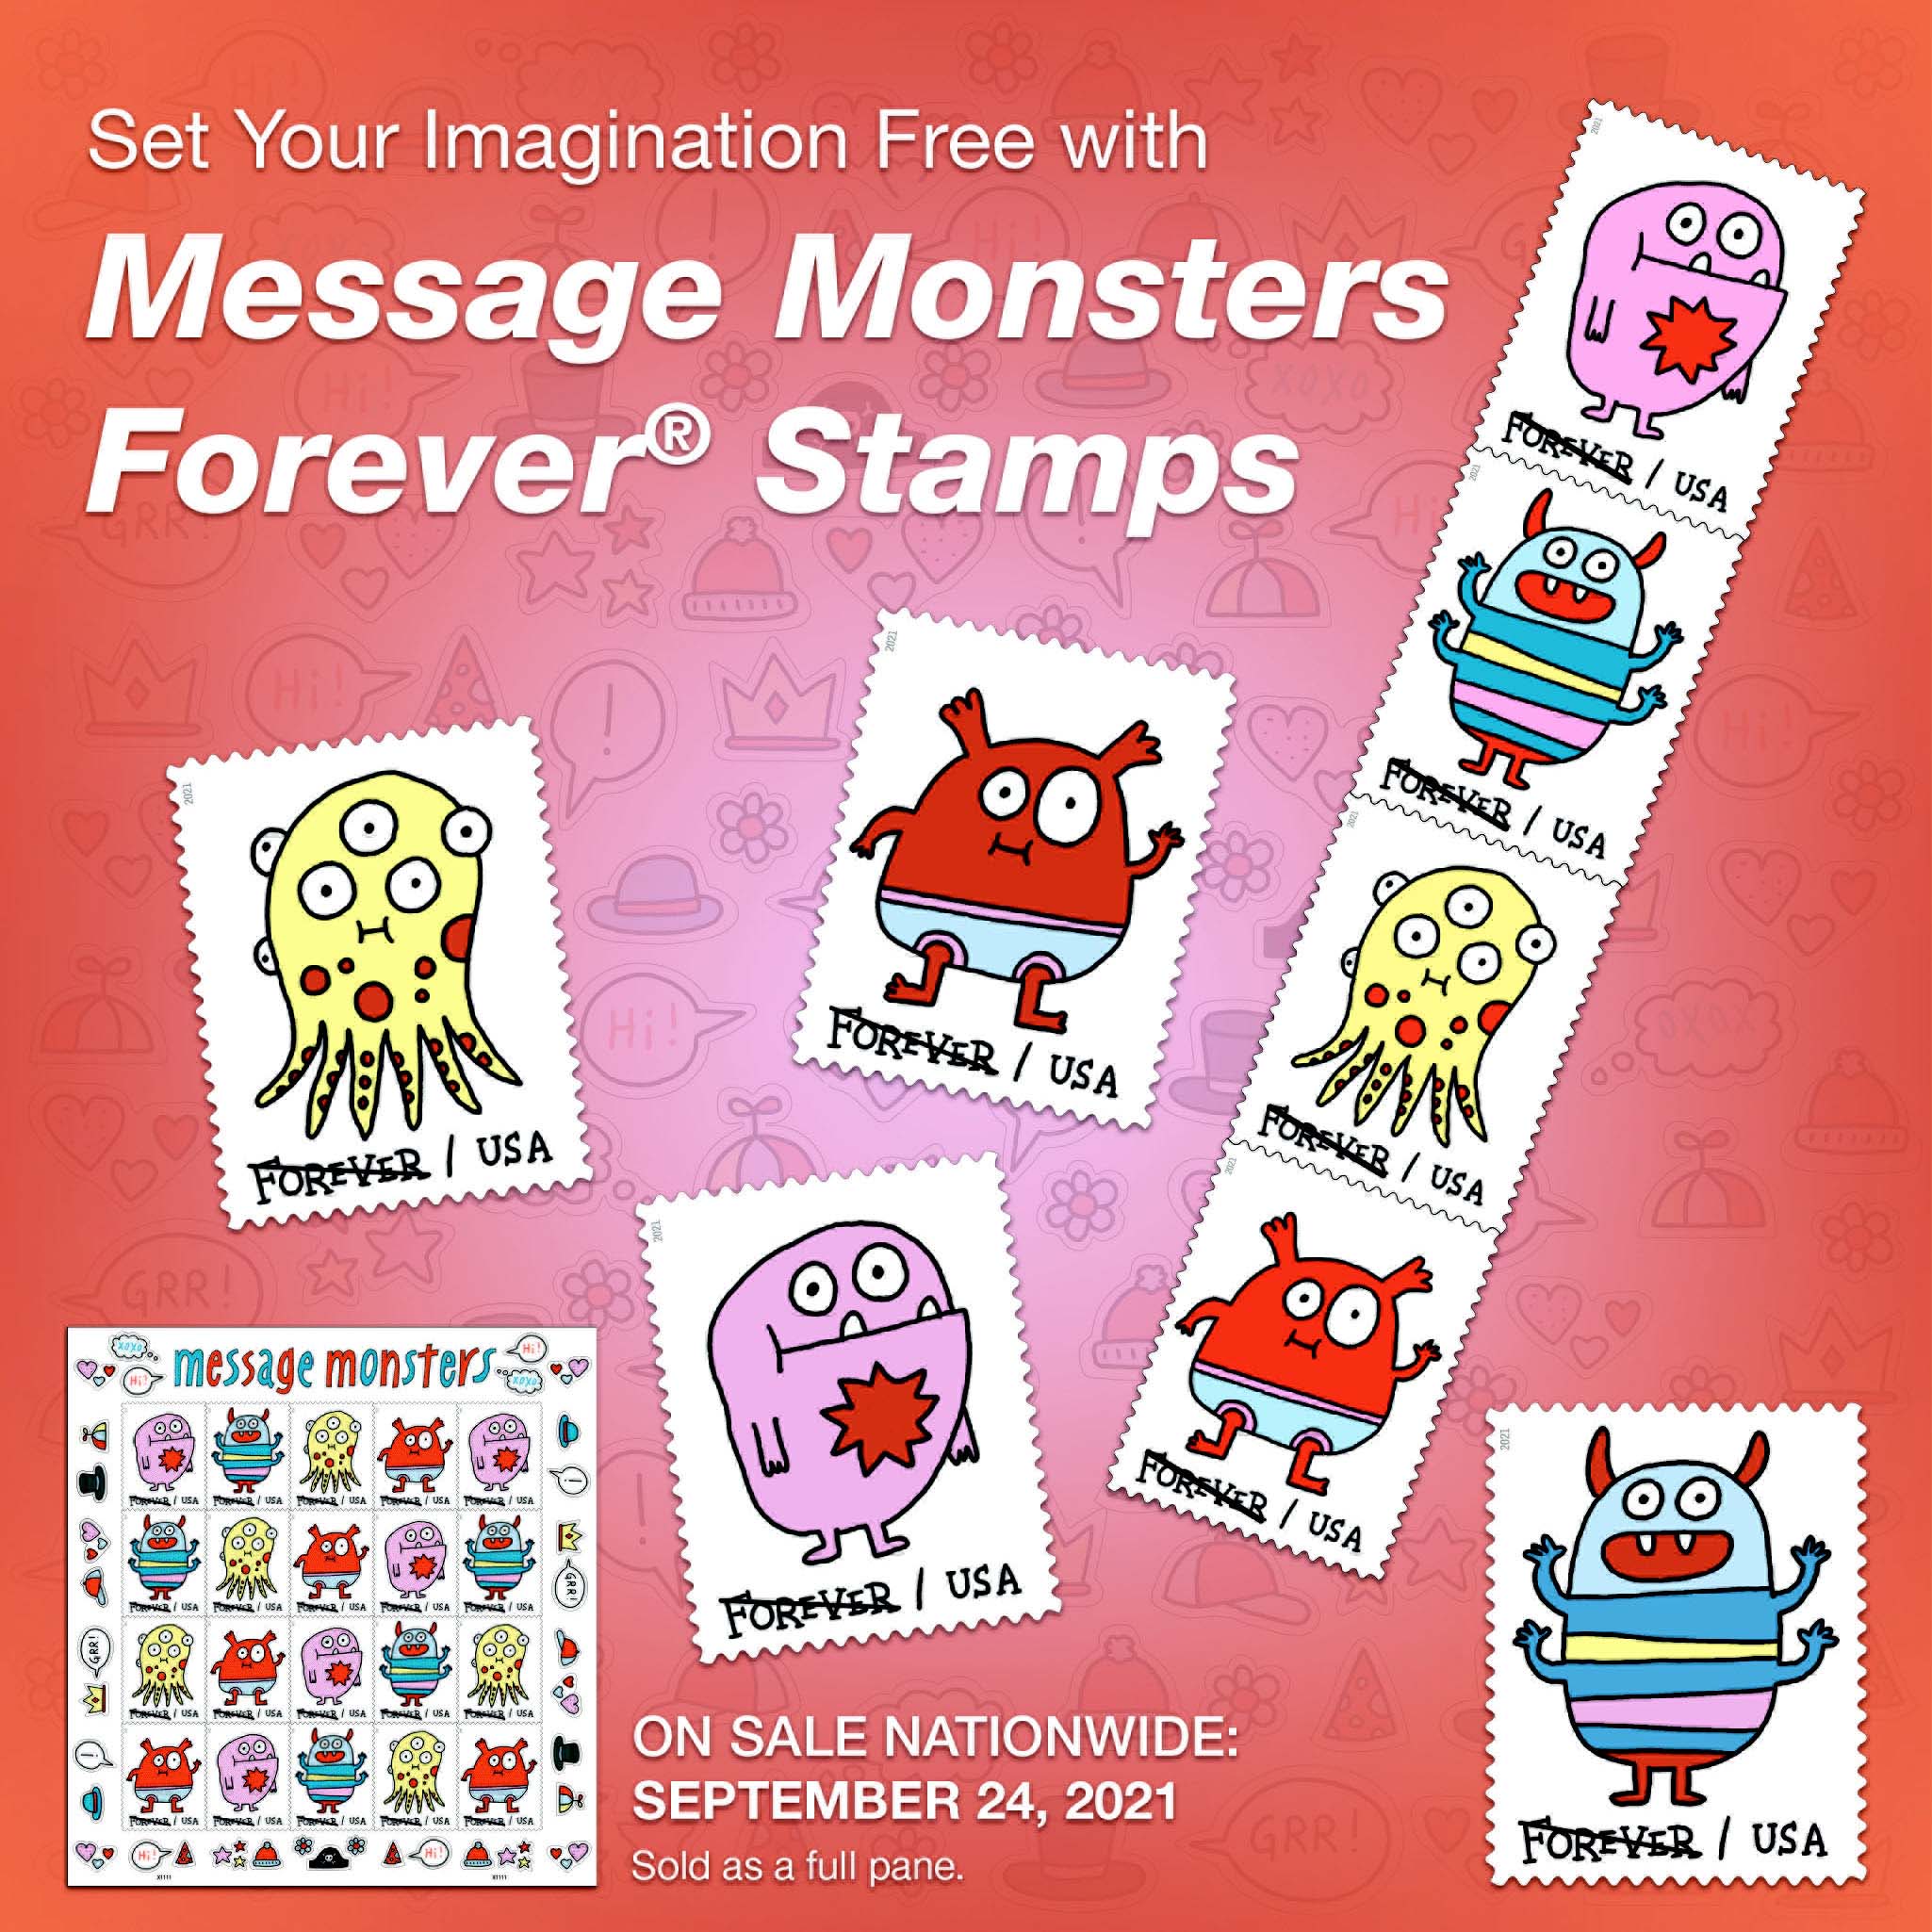 Set Your Imagination Free with Message Monsters Forever Stamps. On Sale Nationwide September 24, 2021.